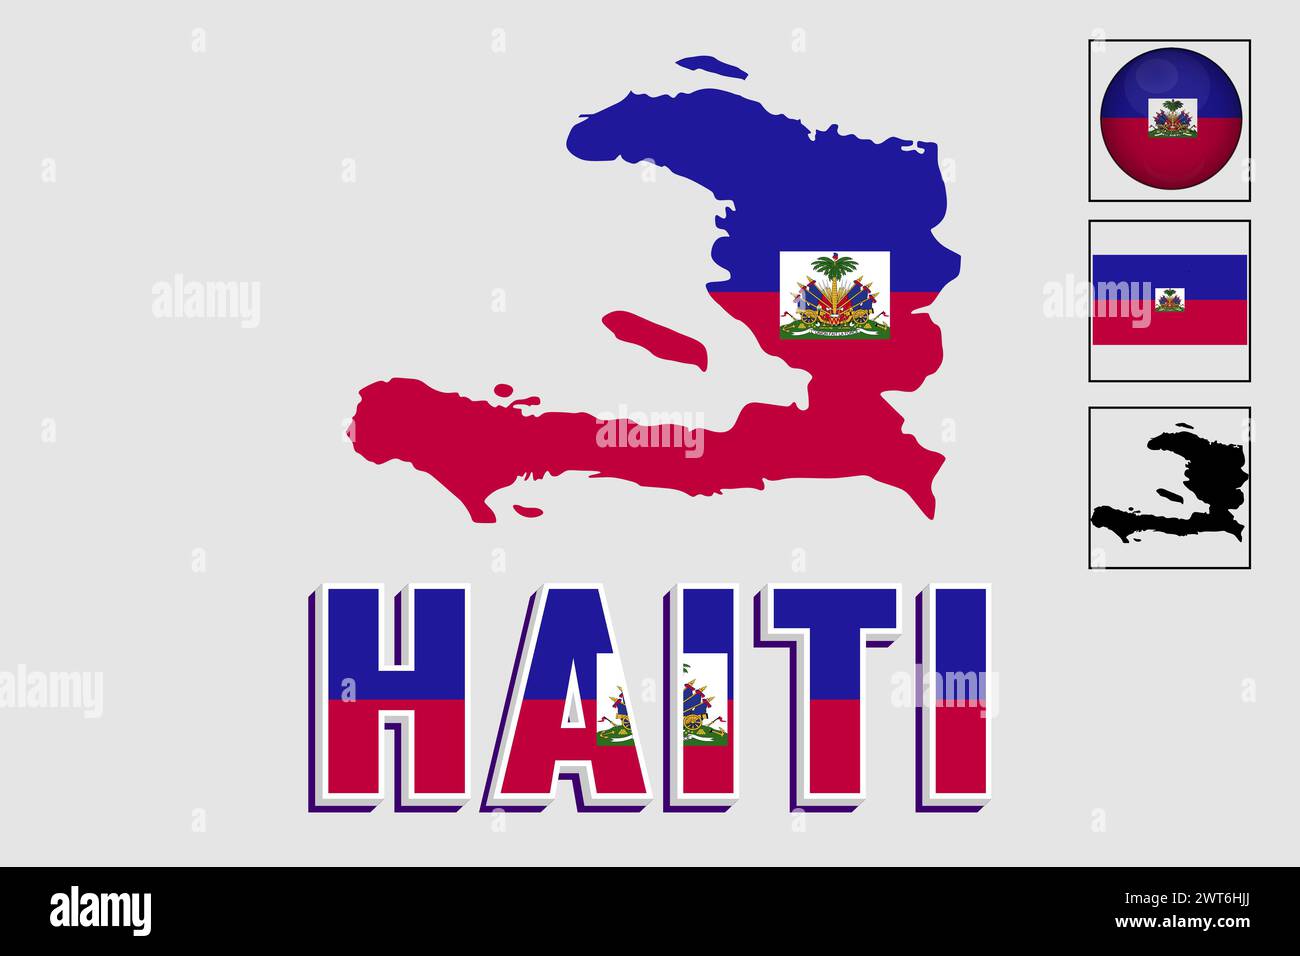 Haiti map and flag in vector illustration Stock Vector